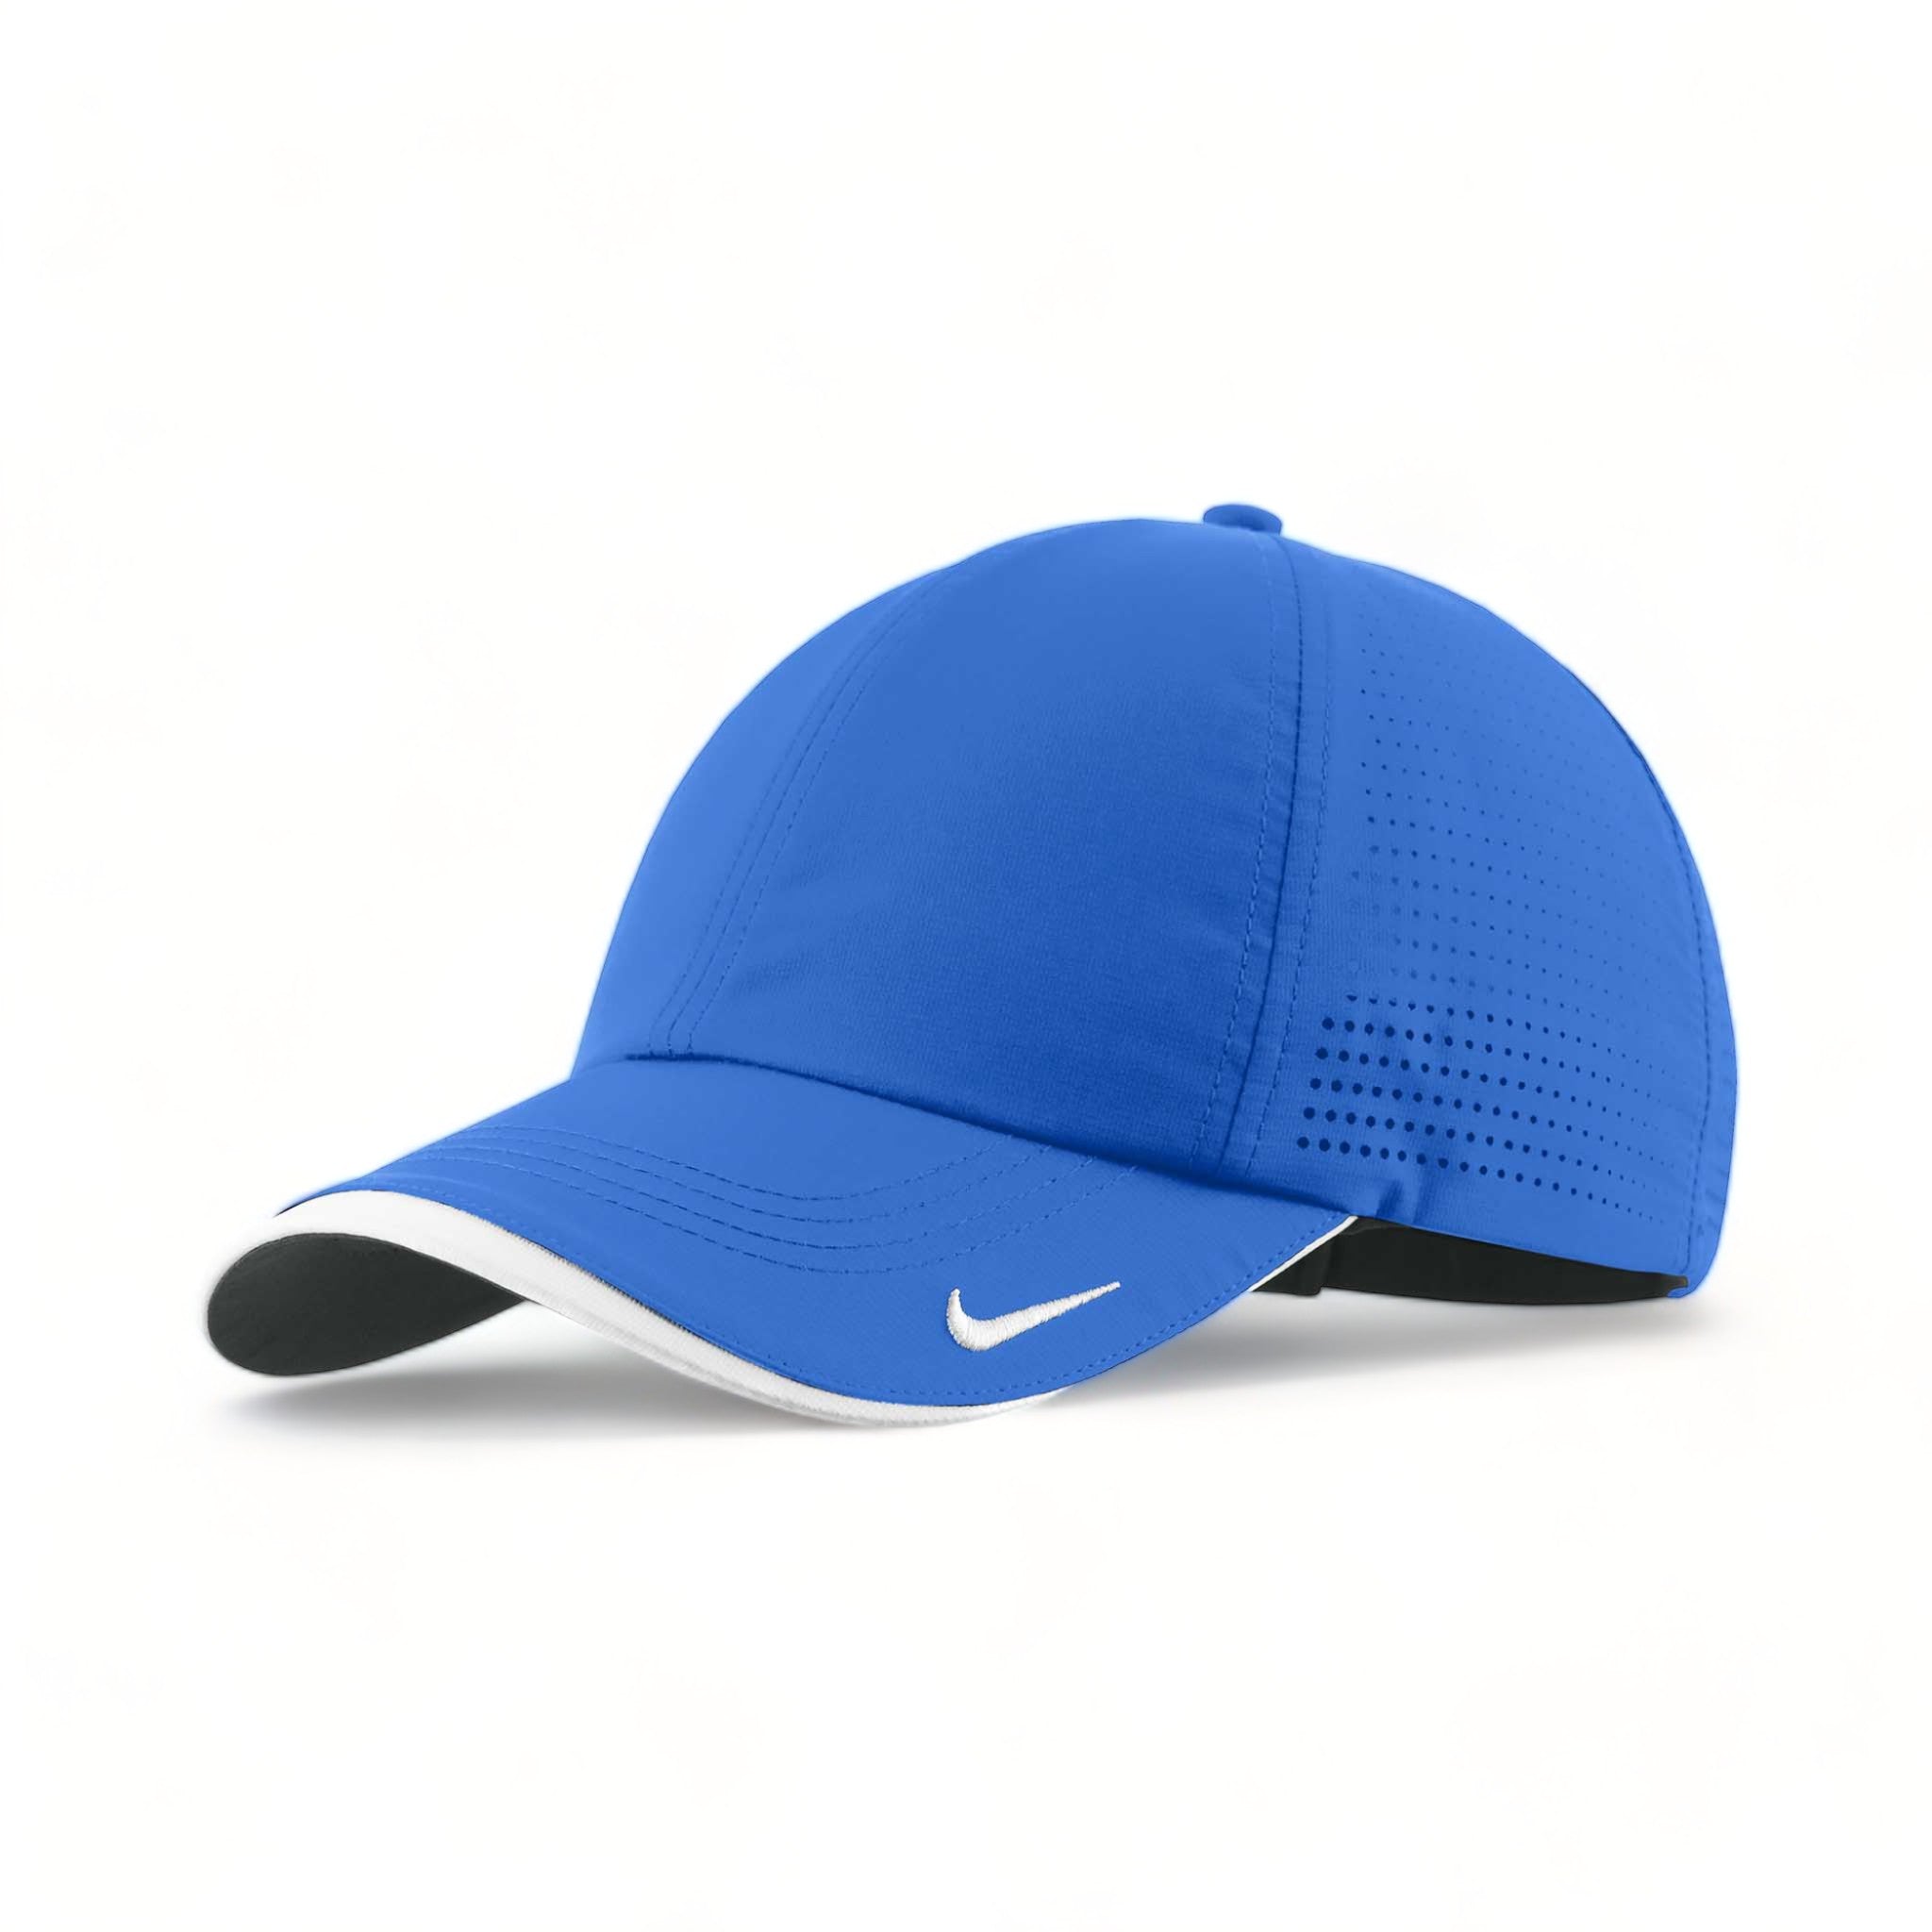 Side view of Nike NKFB6445 custom hat in game royal and white